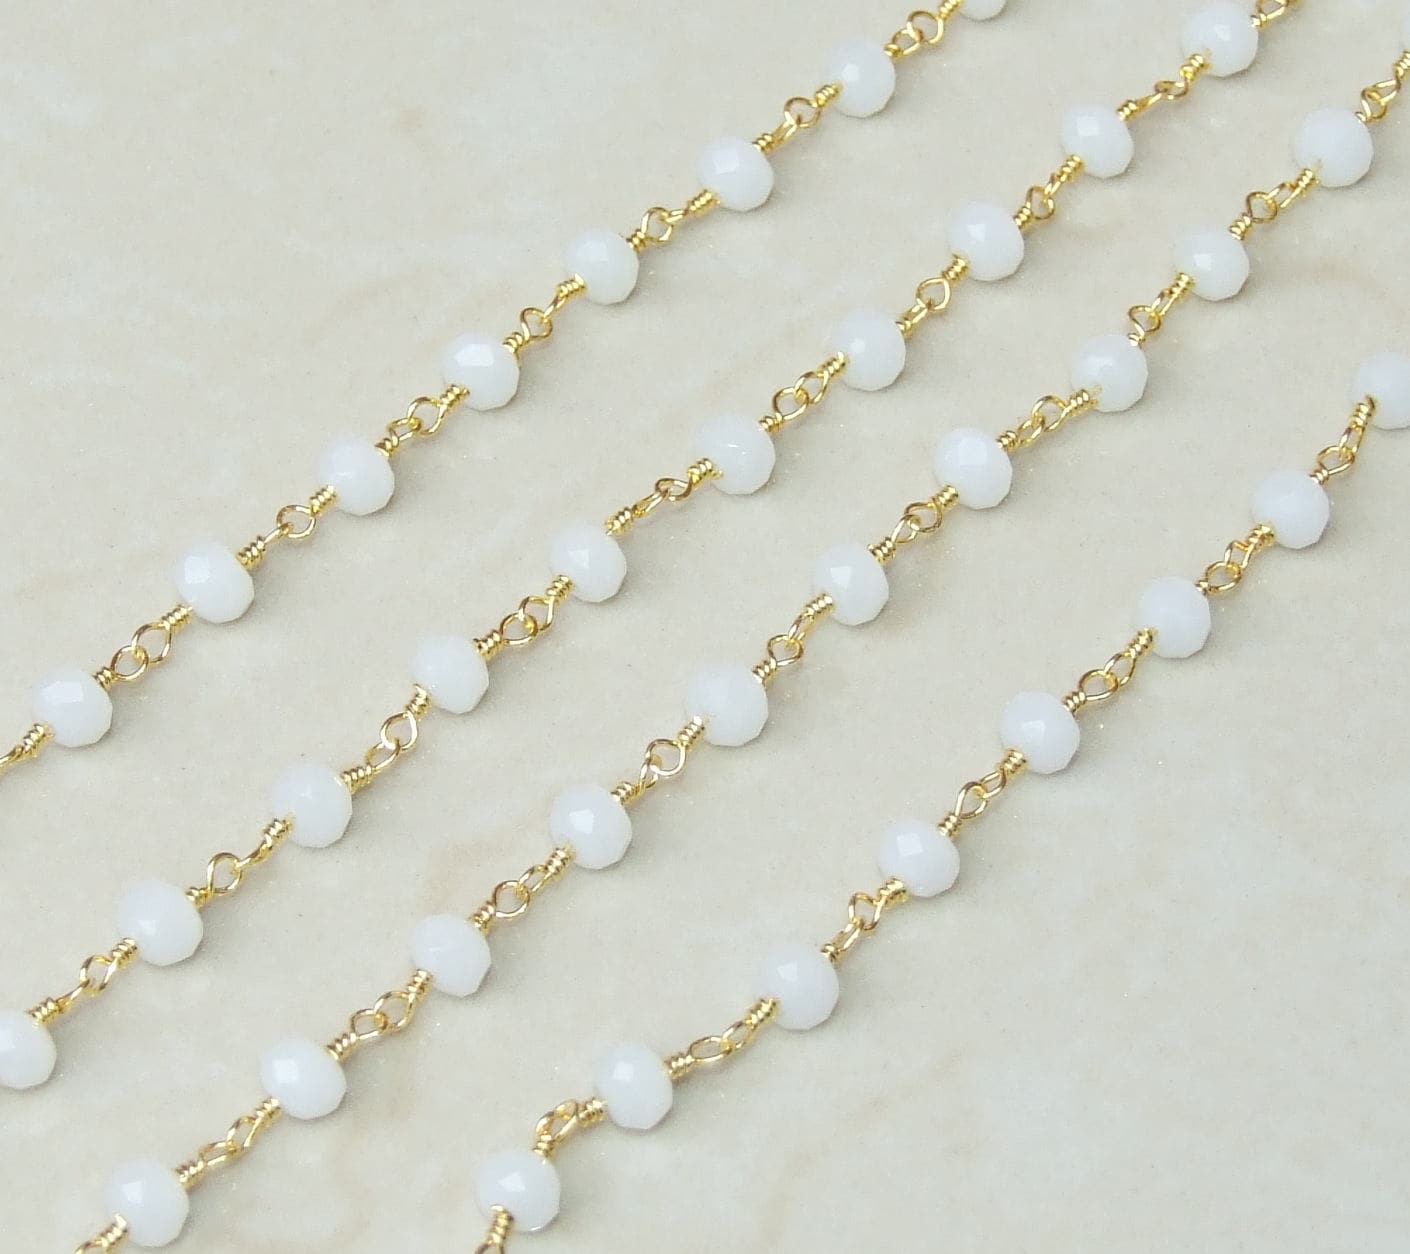 White Opalized  Glass Rosary Chain, Bulk Chain, Rondelle Glass Beads, Beaded Chain, Body Chain, Gold Chain, Necklace Chain, Belly Chain